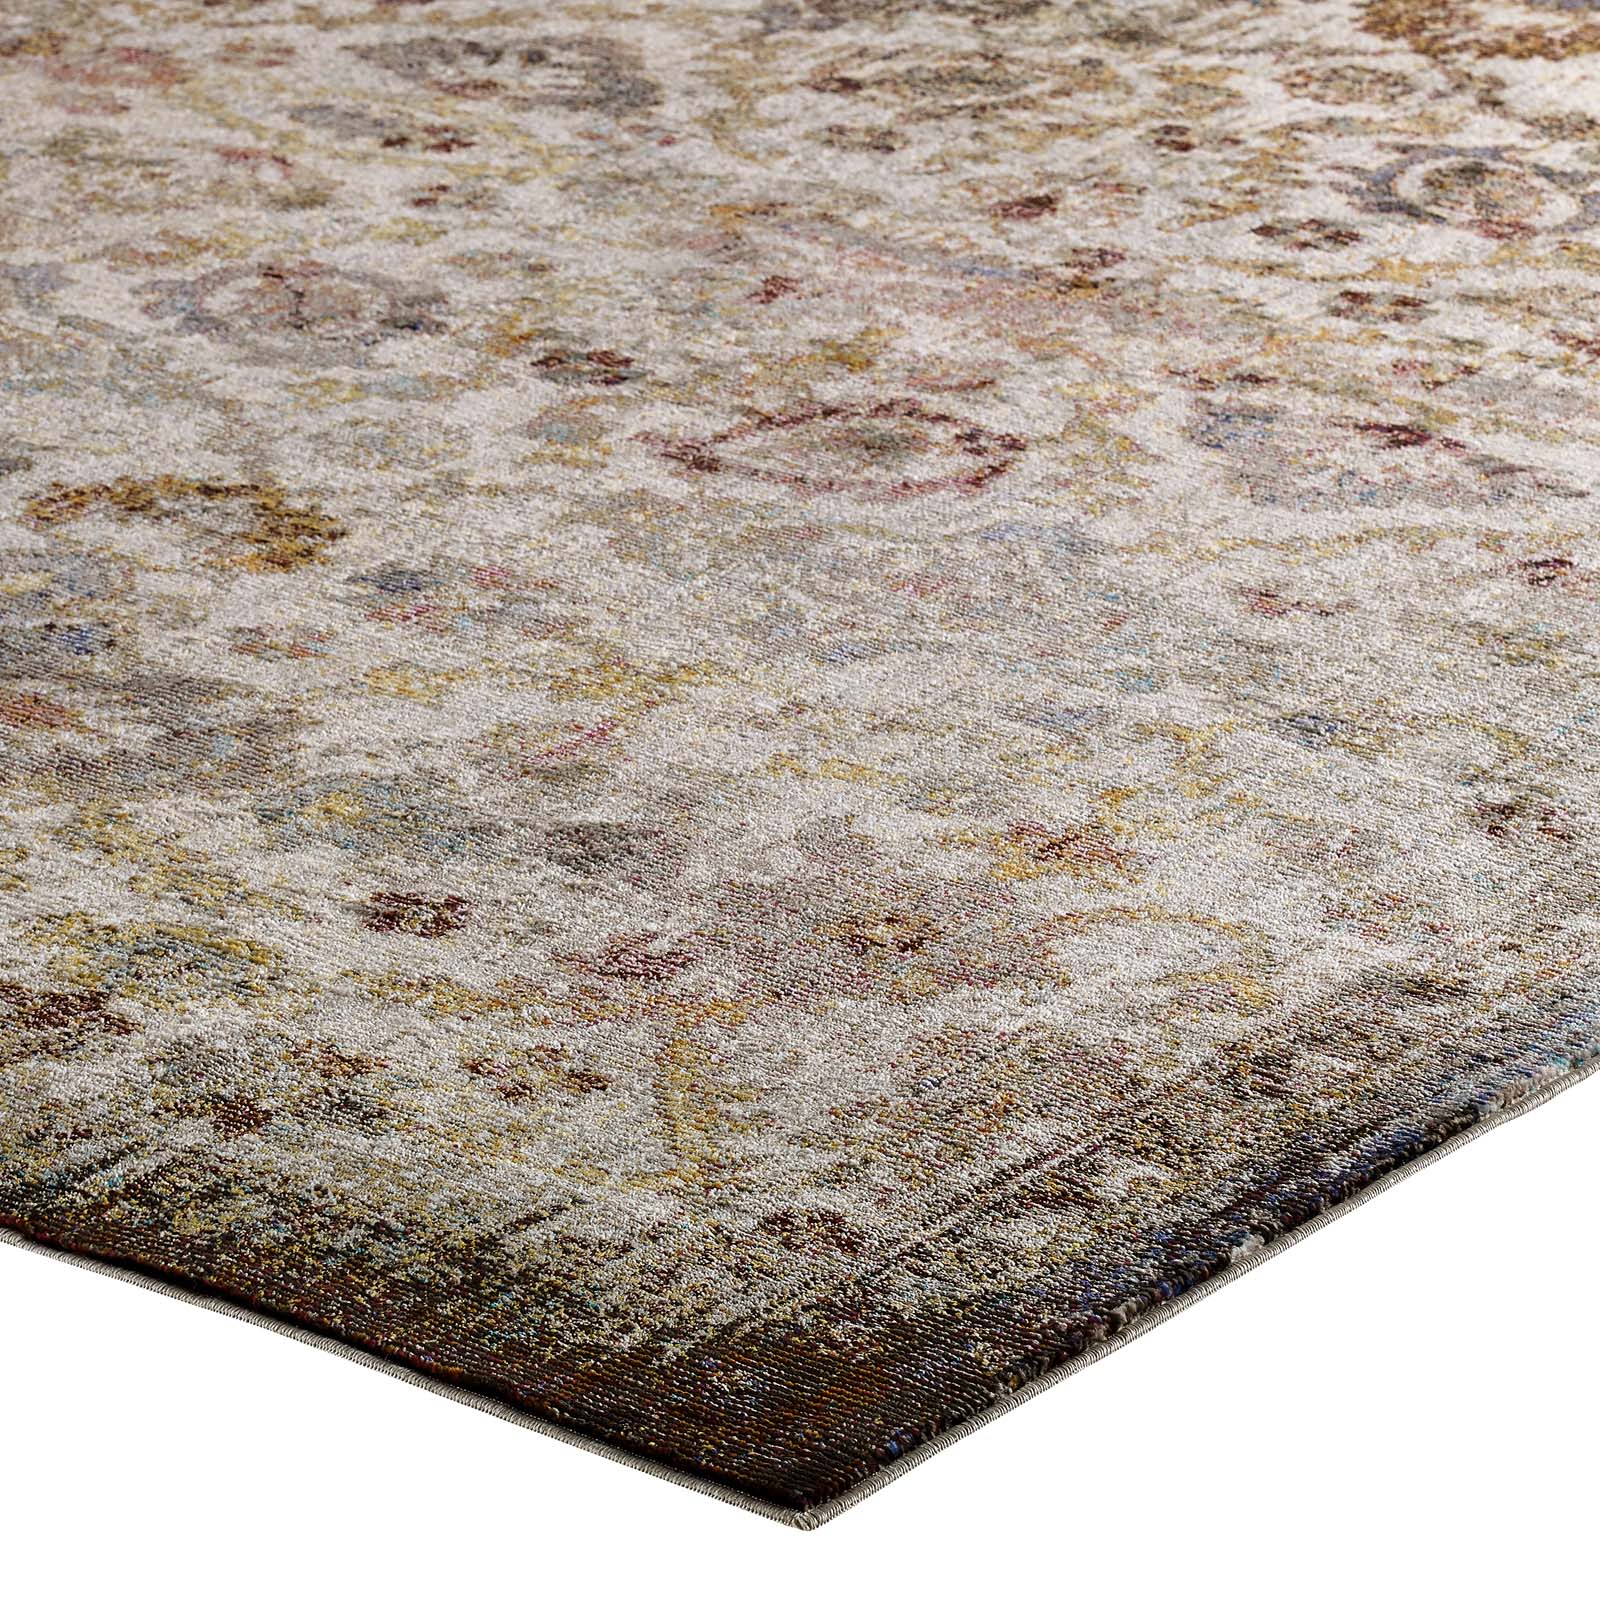 Success Kaede Distressed Vintage Floral Moroccan Trellis 8x10 Area Rug-Area Rug-Modway-Wall2Wall Furnishings